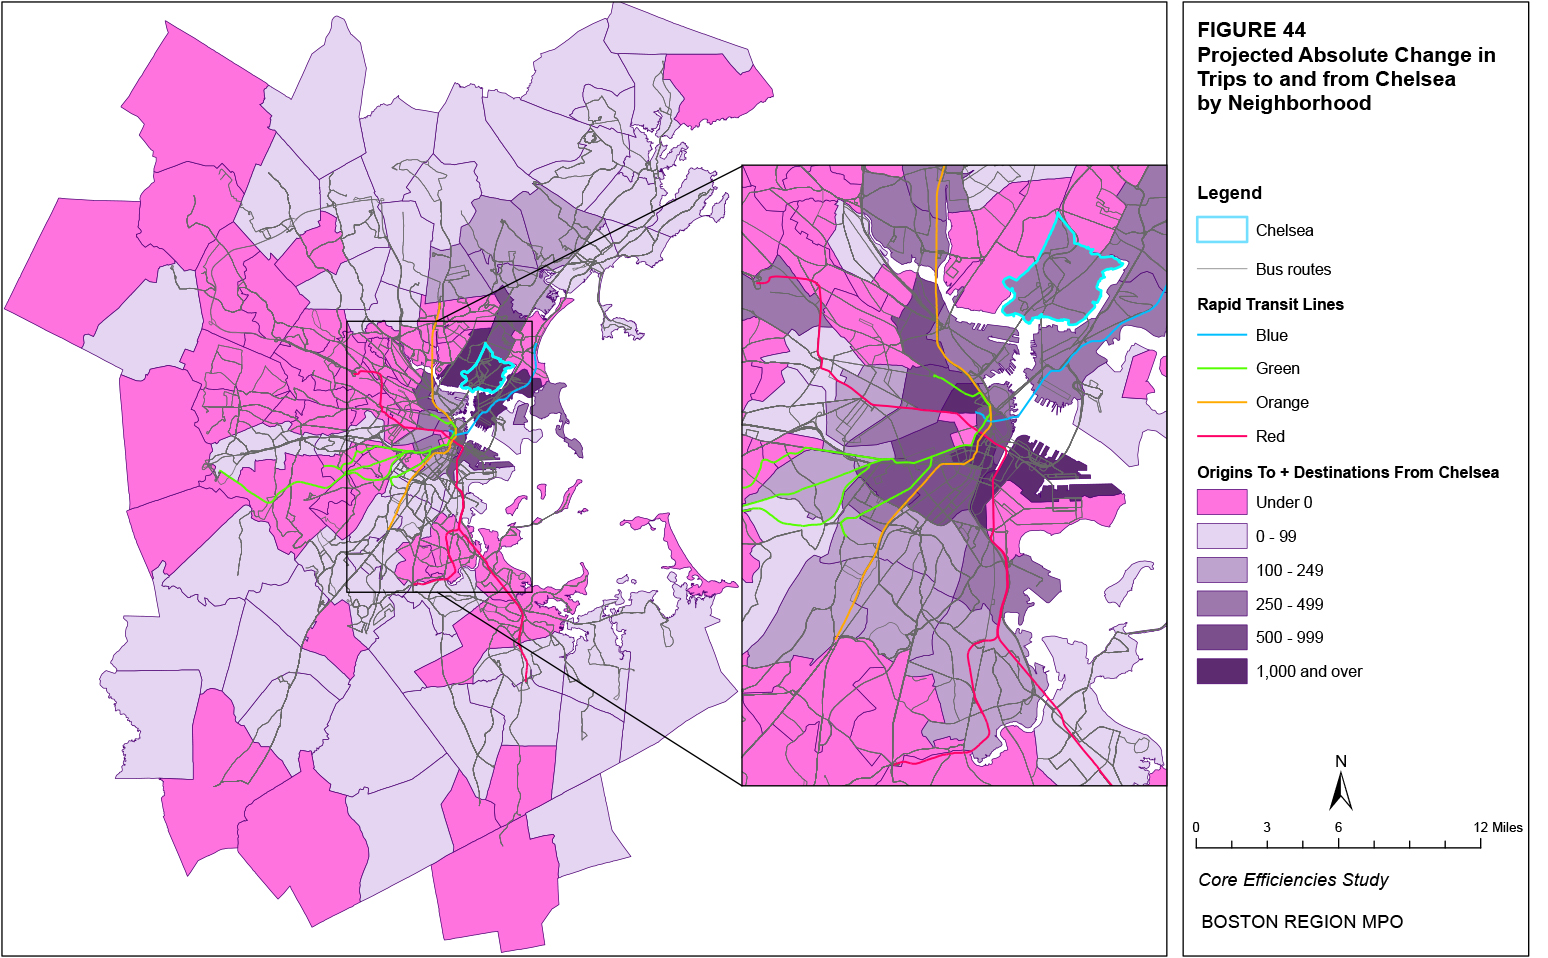 This map shows the projected absolute change in trips to and from the Chelsea neighborhood by neighborhood.